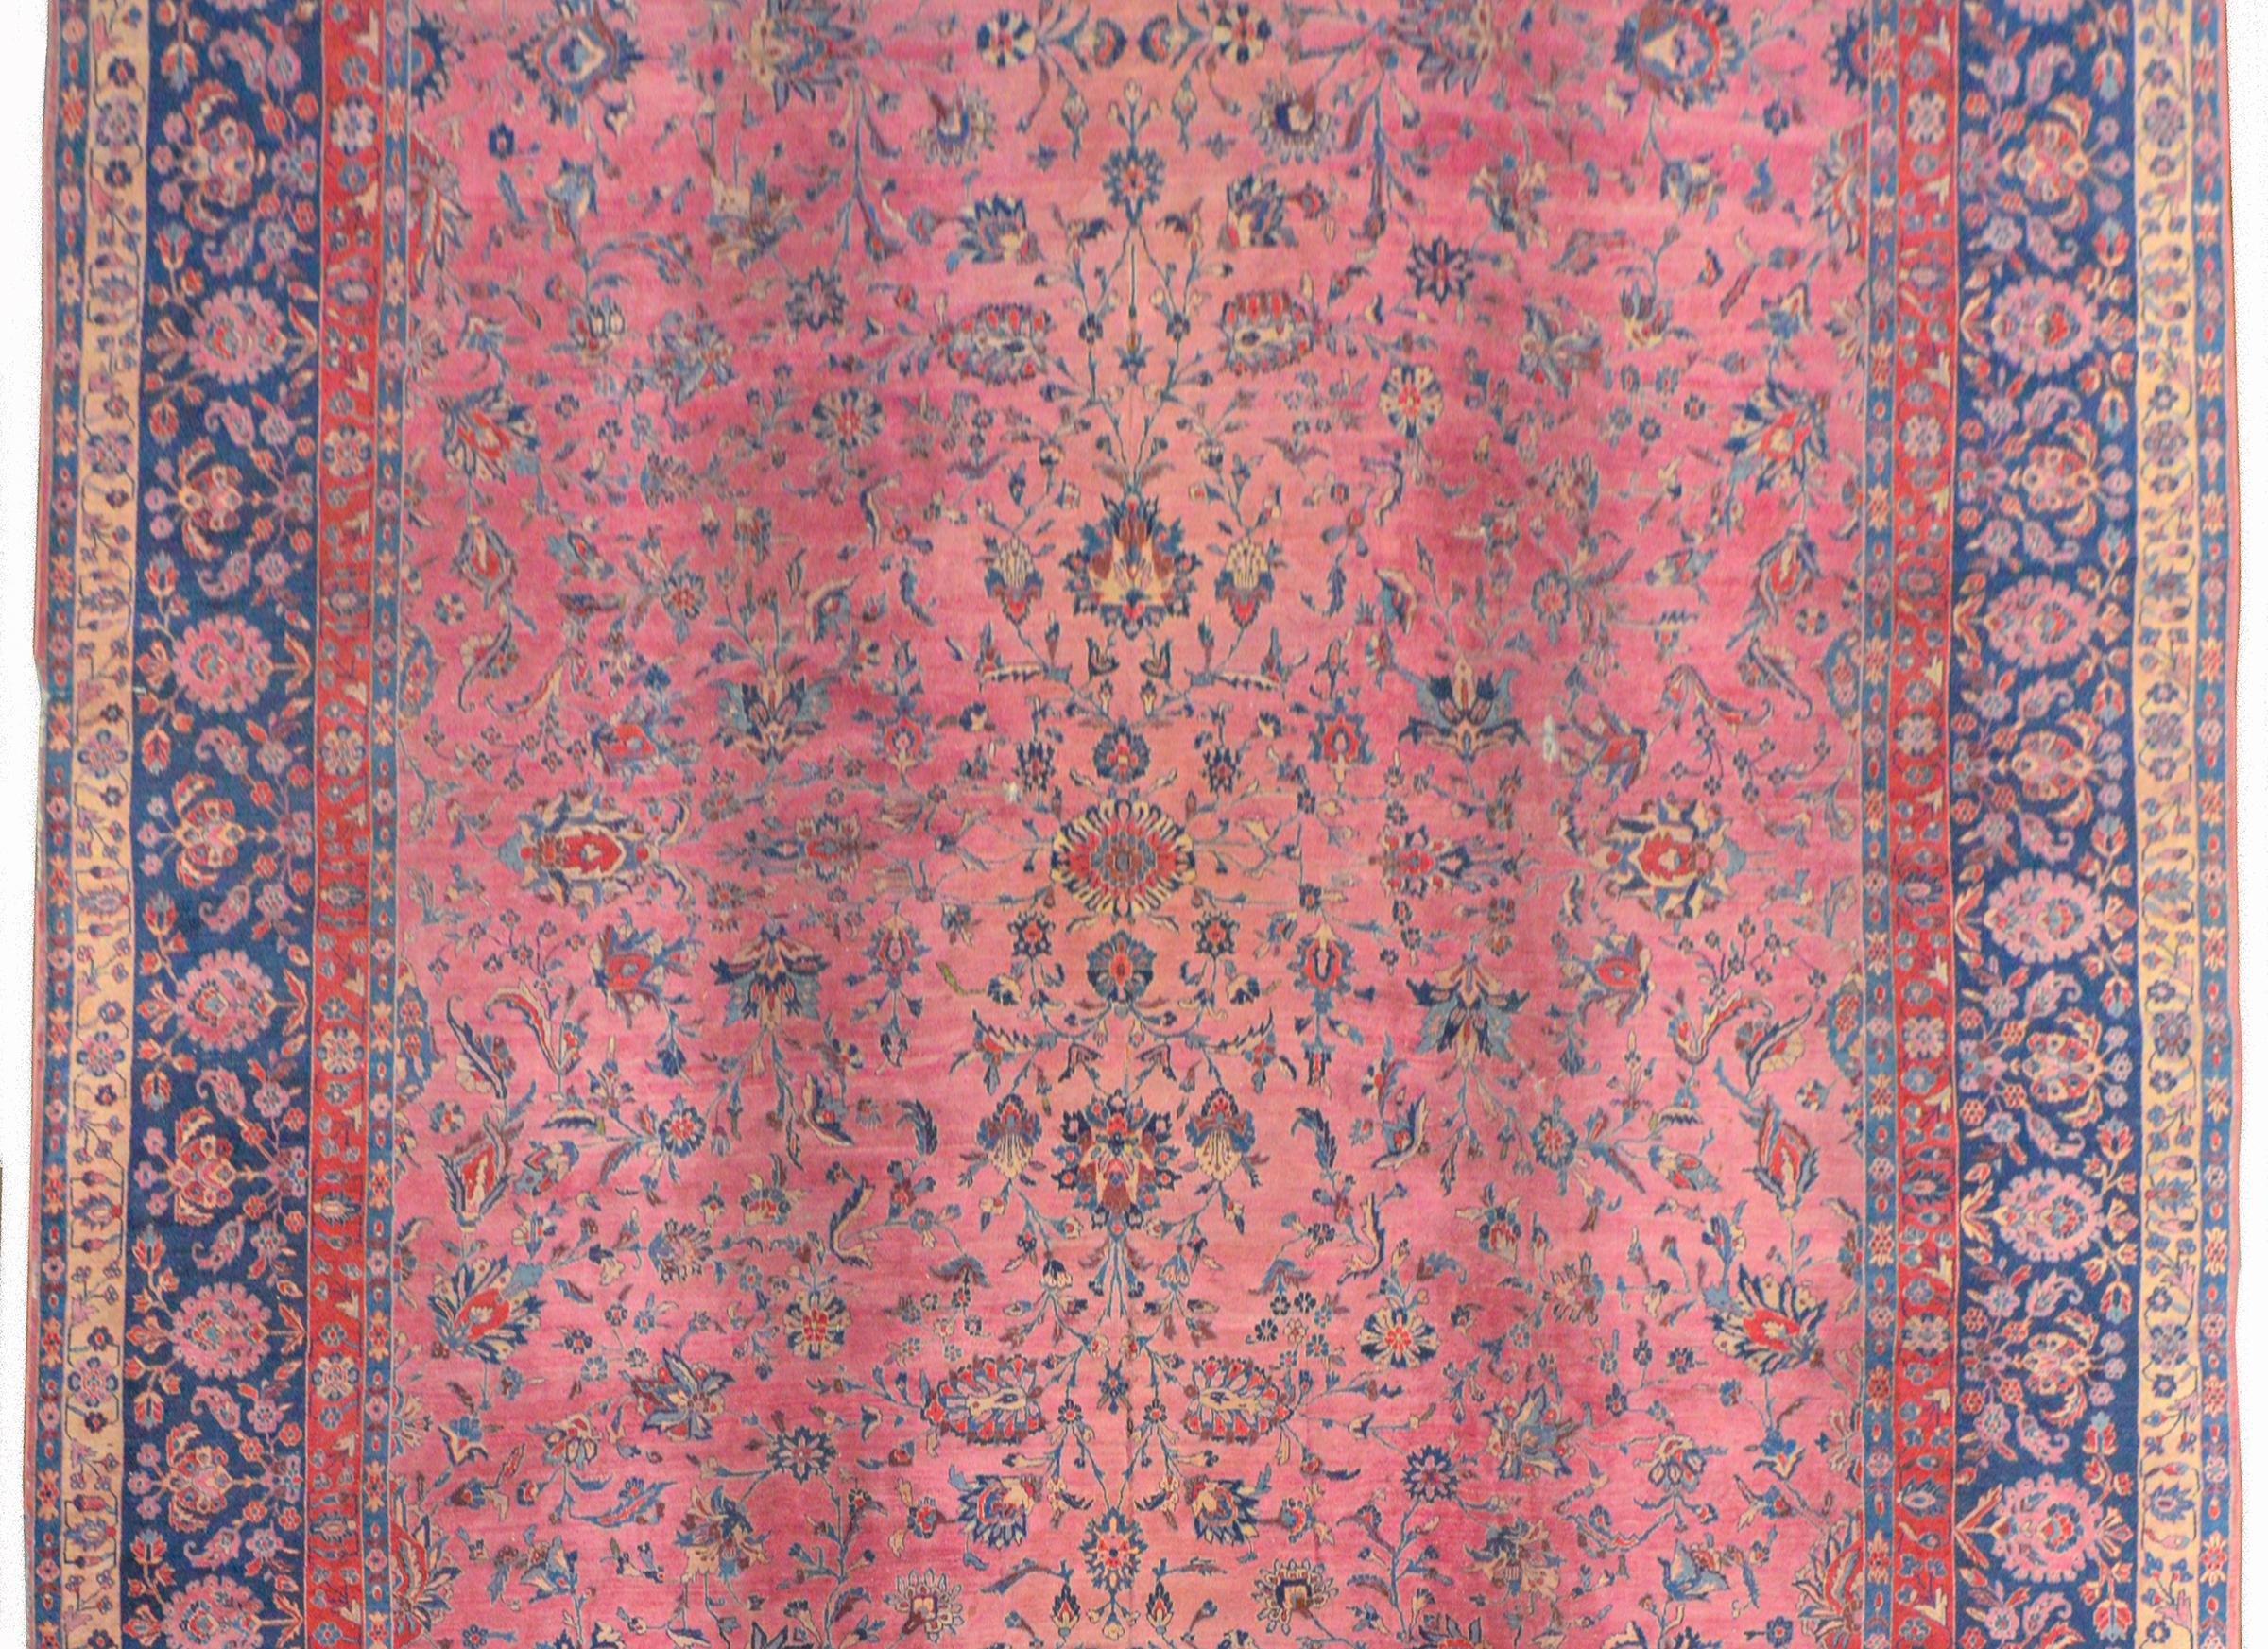 A gorgeous early 20th century Persian Sarouk rug with a fantastic fine all-over large-scale floral and scrolling vine pattern woven in light and dark indigo, coral, brown, against an abrash fuchsia background. The border is extraordinary, with a